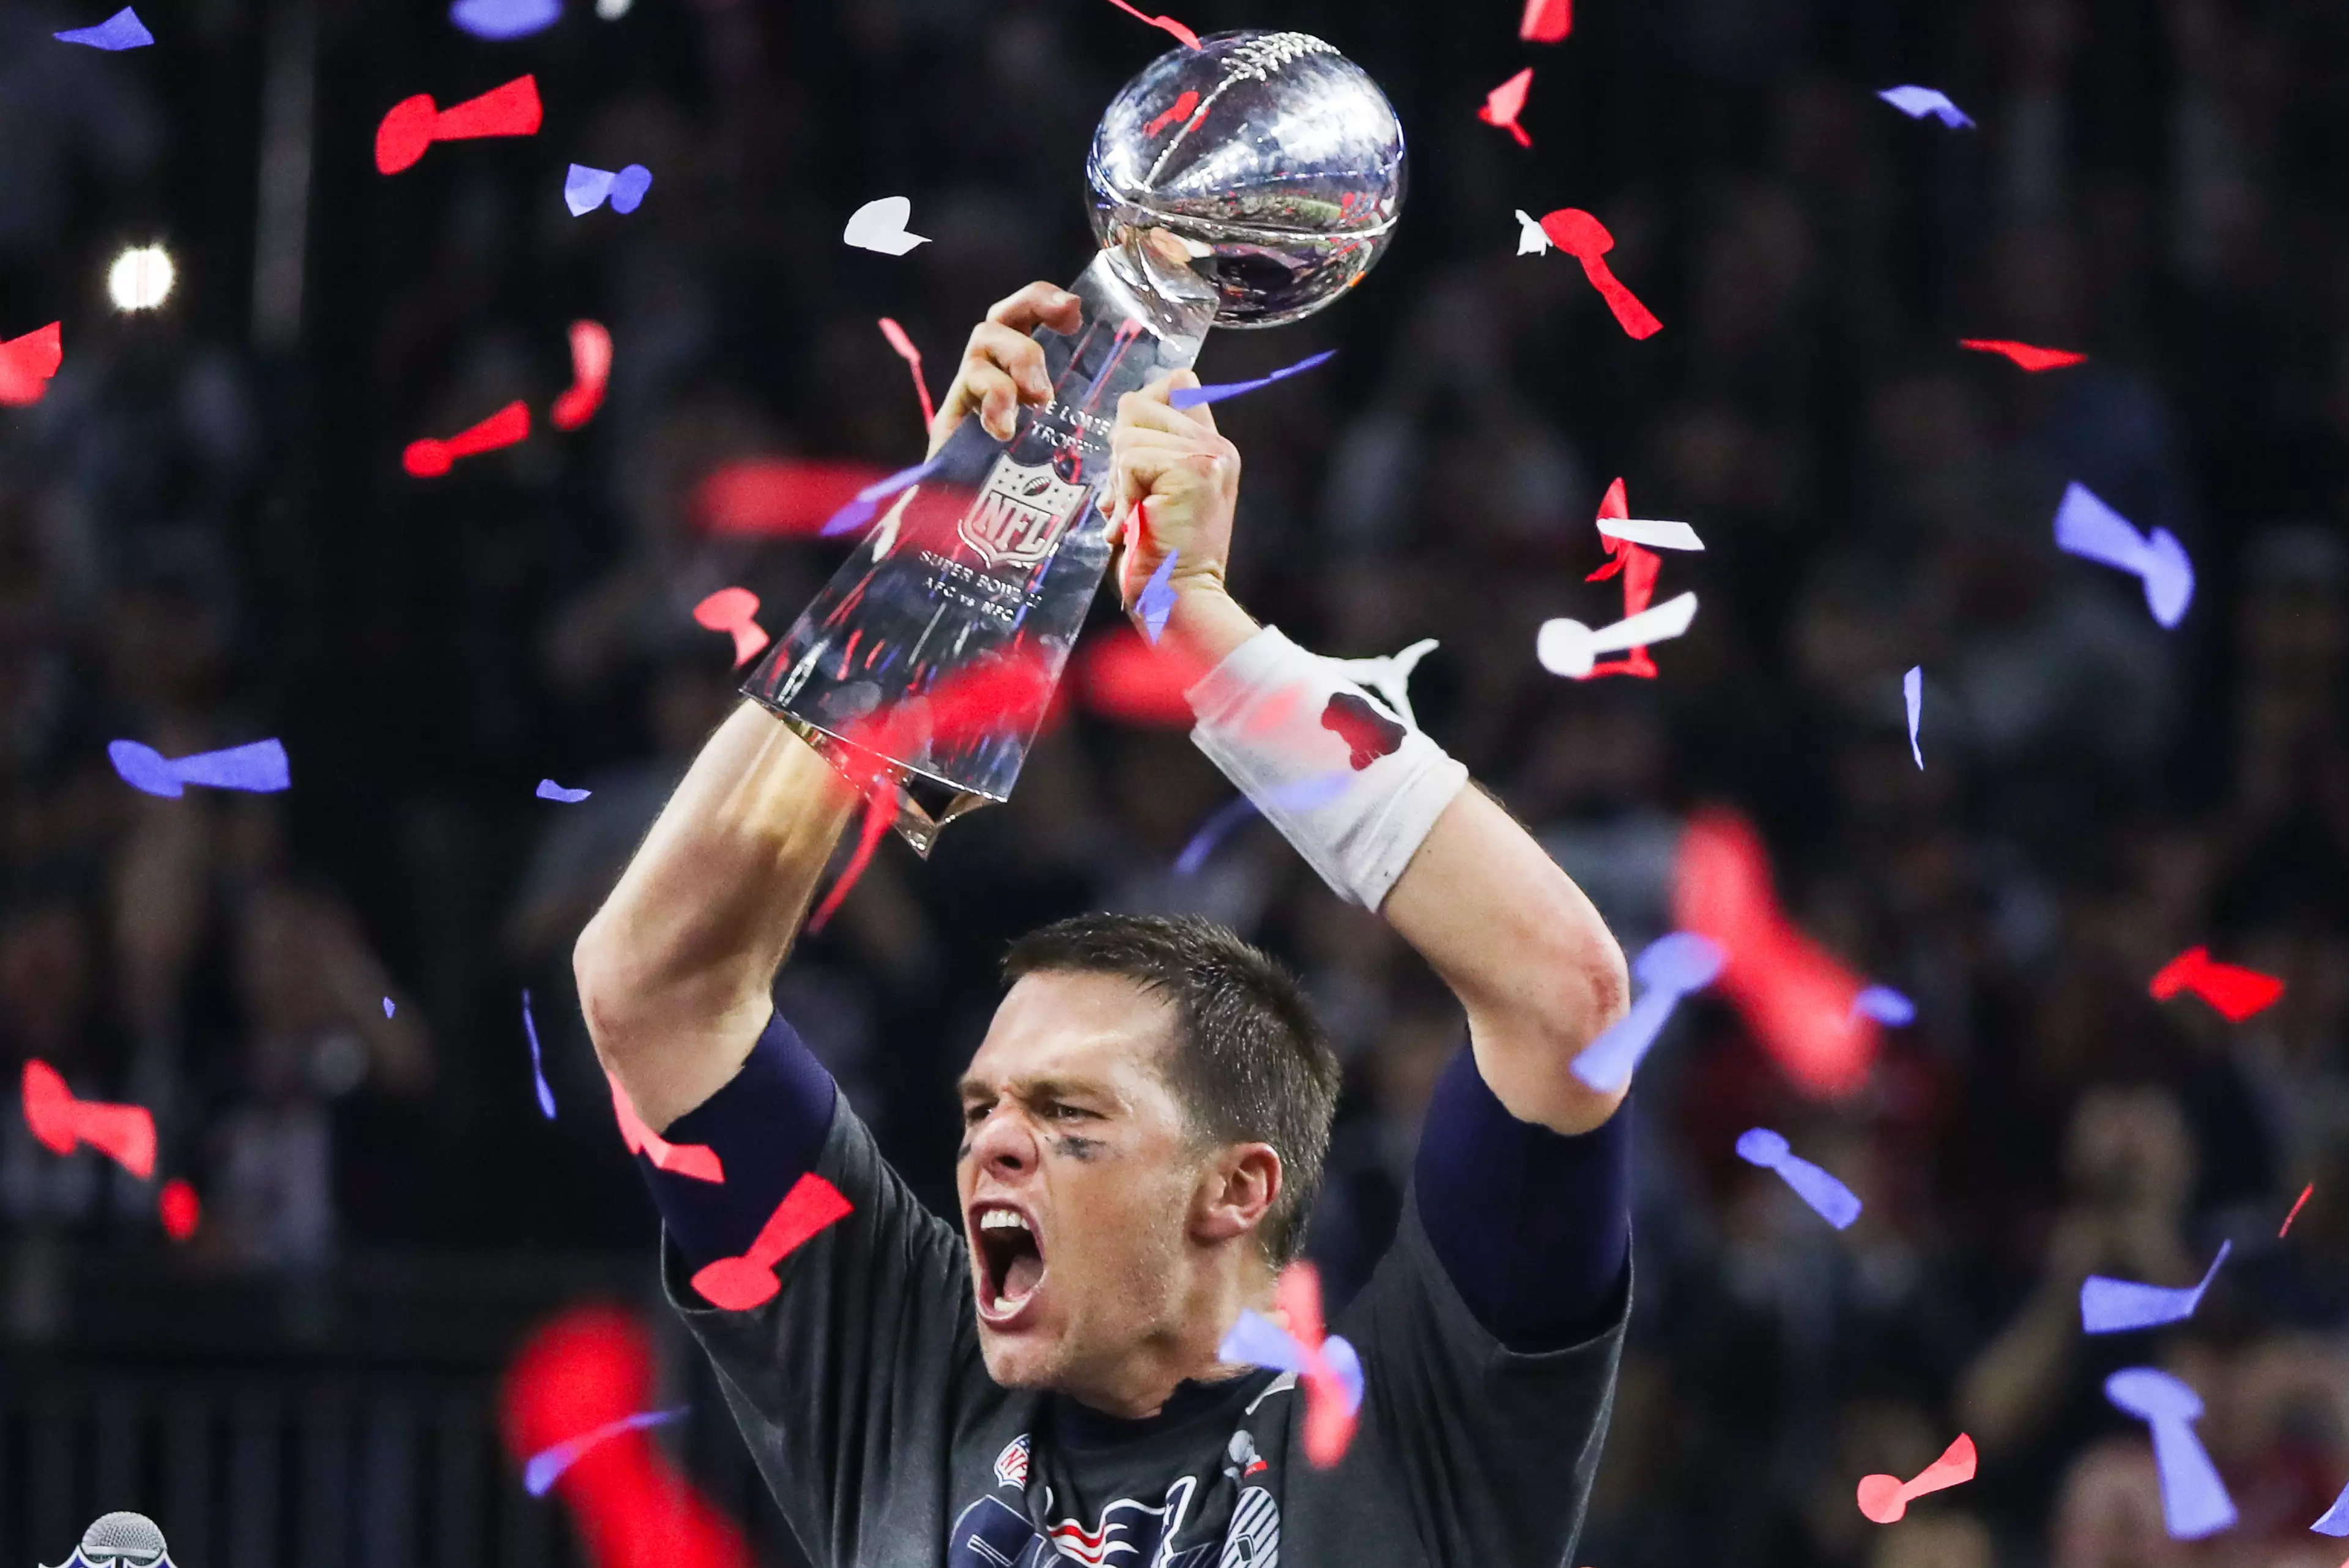 Tom Brady celebrates an incredible victory. Image: PA Images